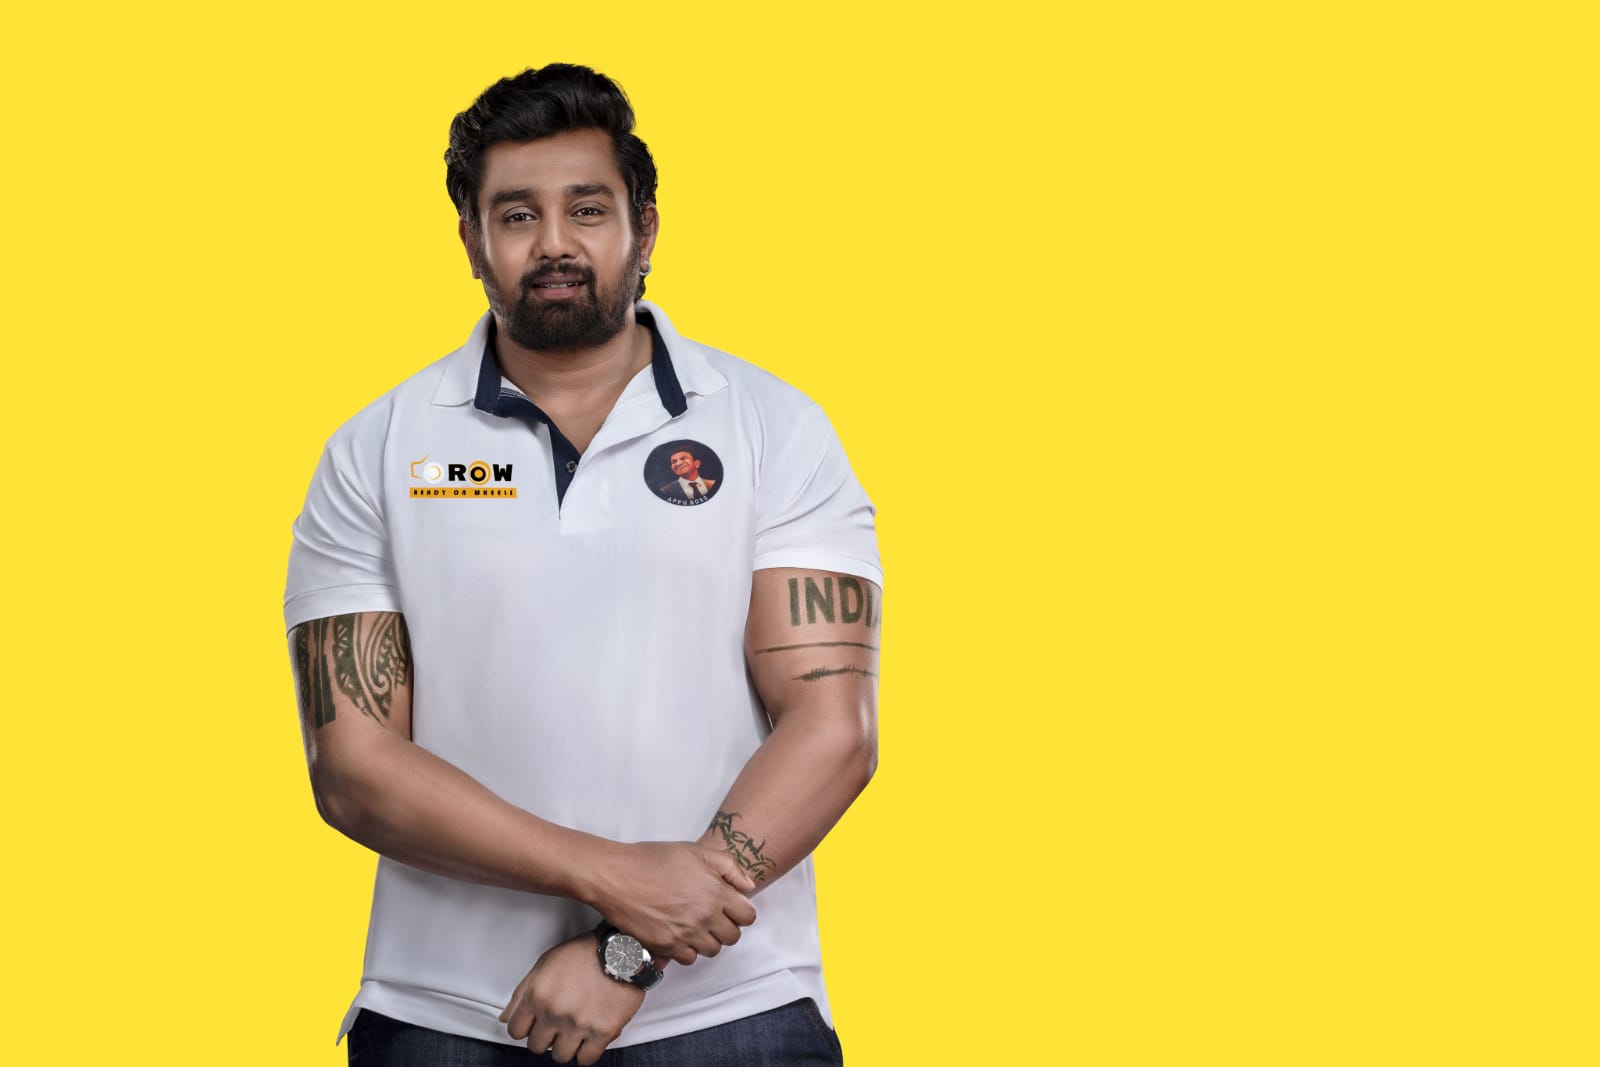 Ready on Wheels app launched by Dhruva Sarja